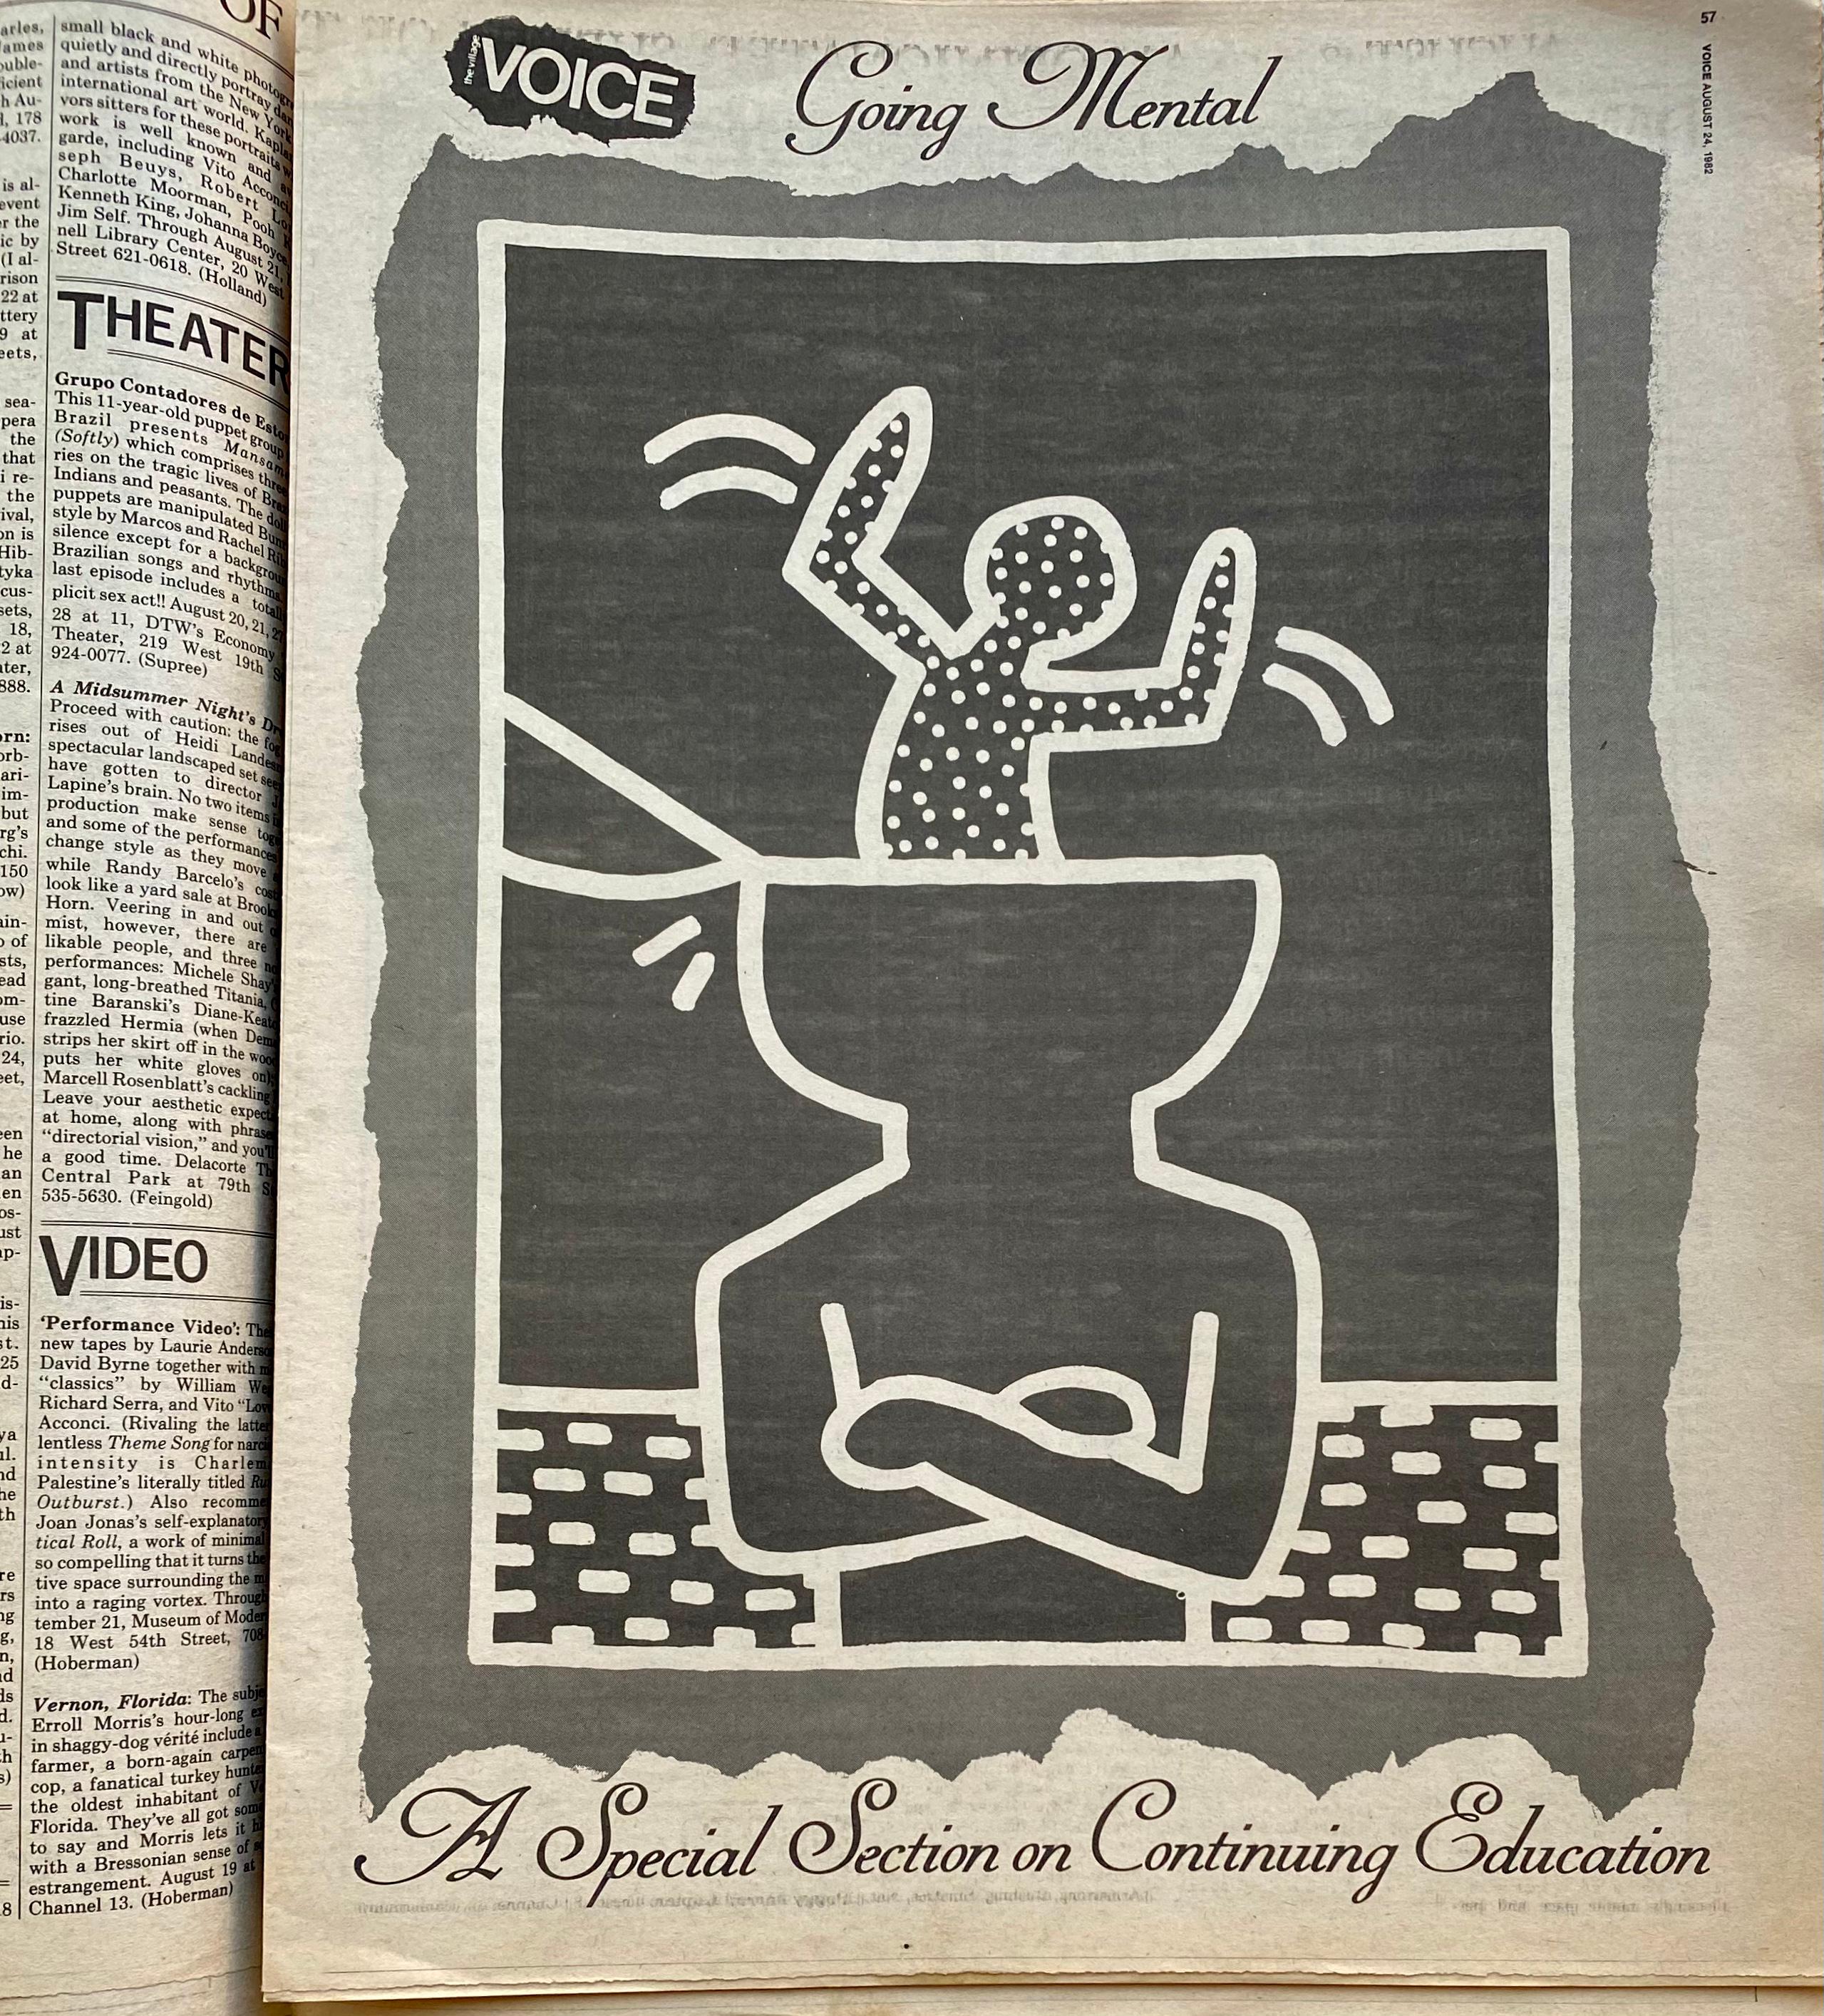 Keith Haring New York, 1982:
Rare highly sought-after 1982 Village Voice newspaper featuring cover and interior illustrations by Keith Haring as part of a ‘special section on continuing education.’

The complete newspaper. Measures: Approximately